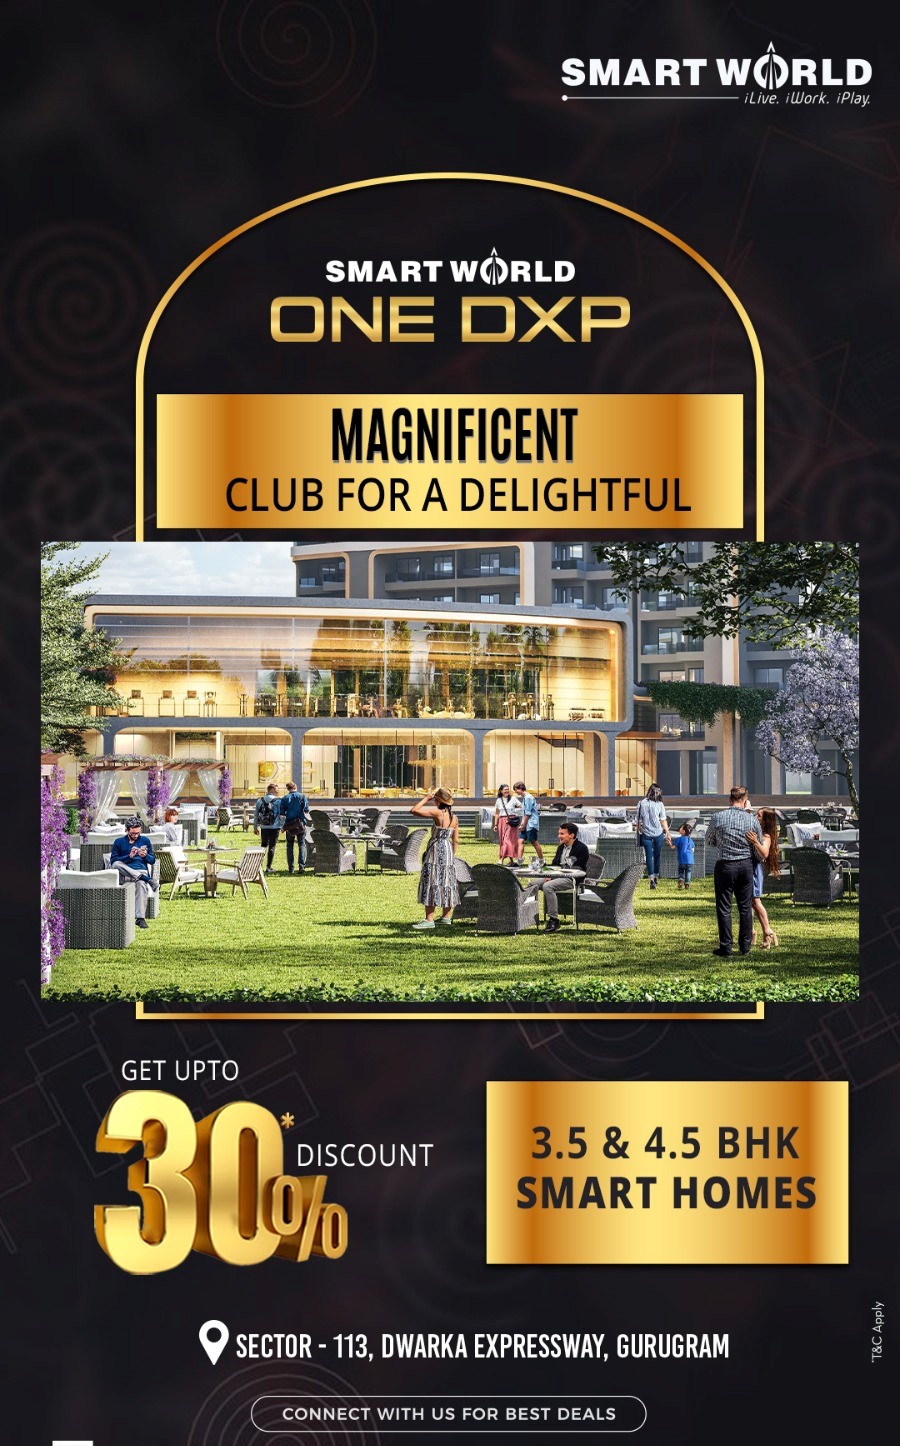 Magnificent club for a Delightful Experience at Smartworld One DXP, Sector 113, Gurgaon. Update